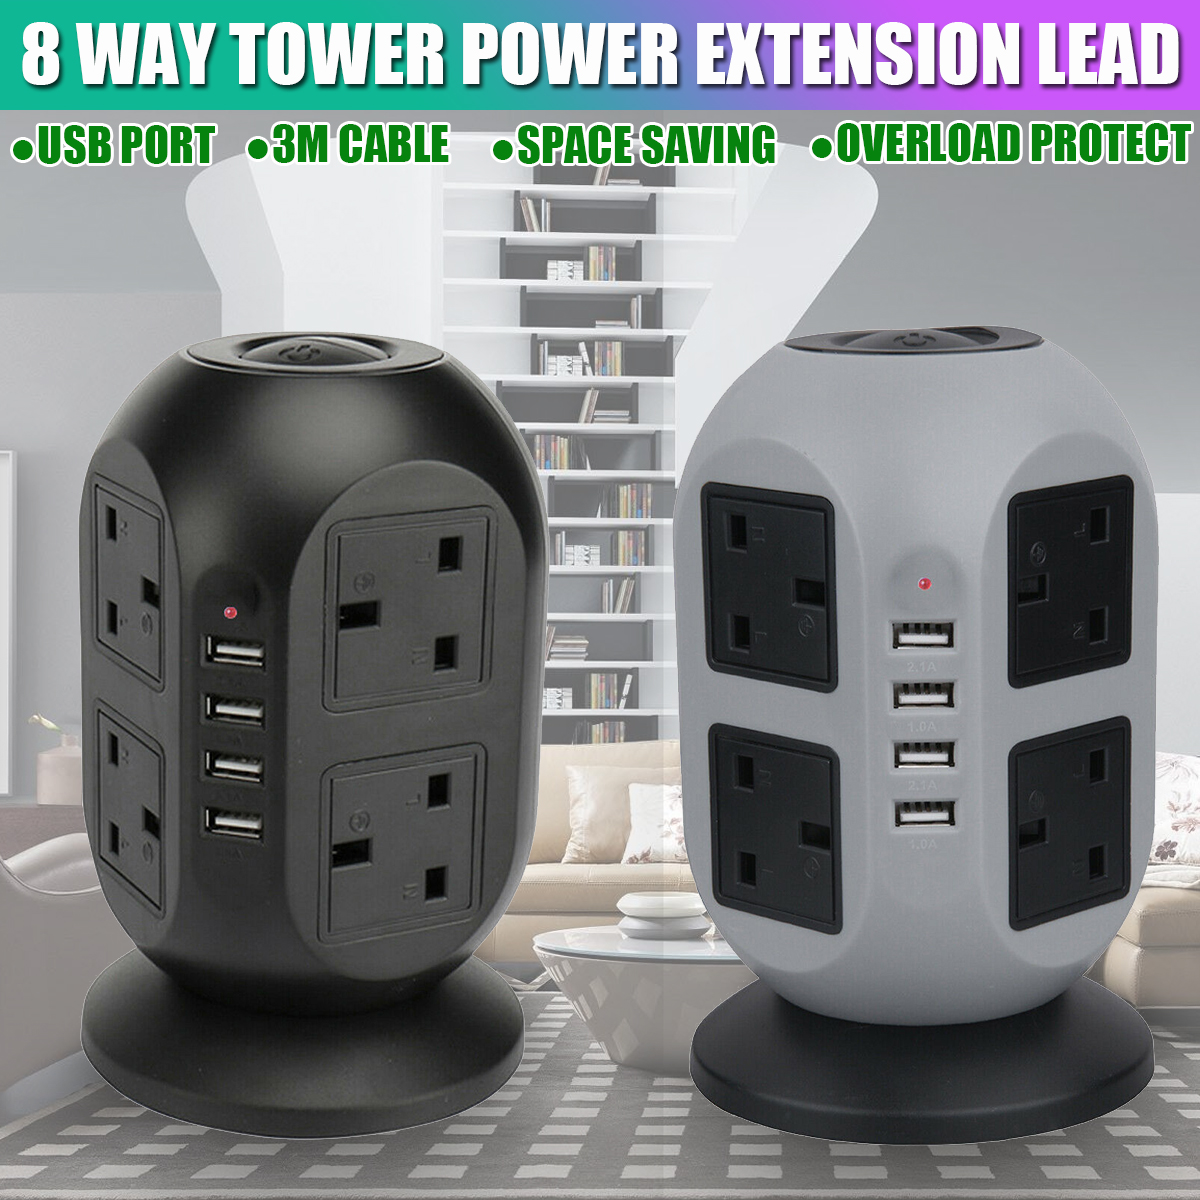 3M-Extension-Lead-Cable-Surge-Protected-Tower-Power-Socket-with-8Way-4-USB-1957280-1